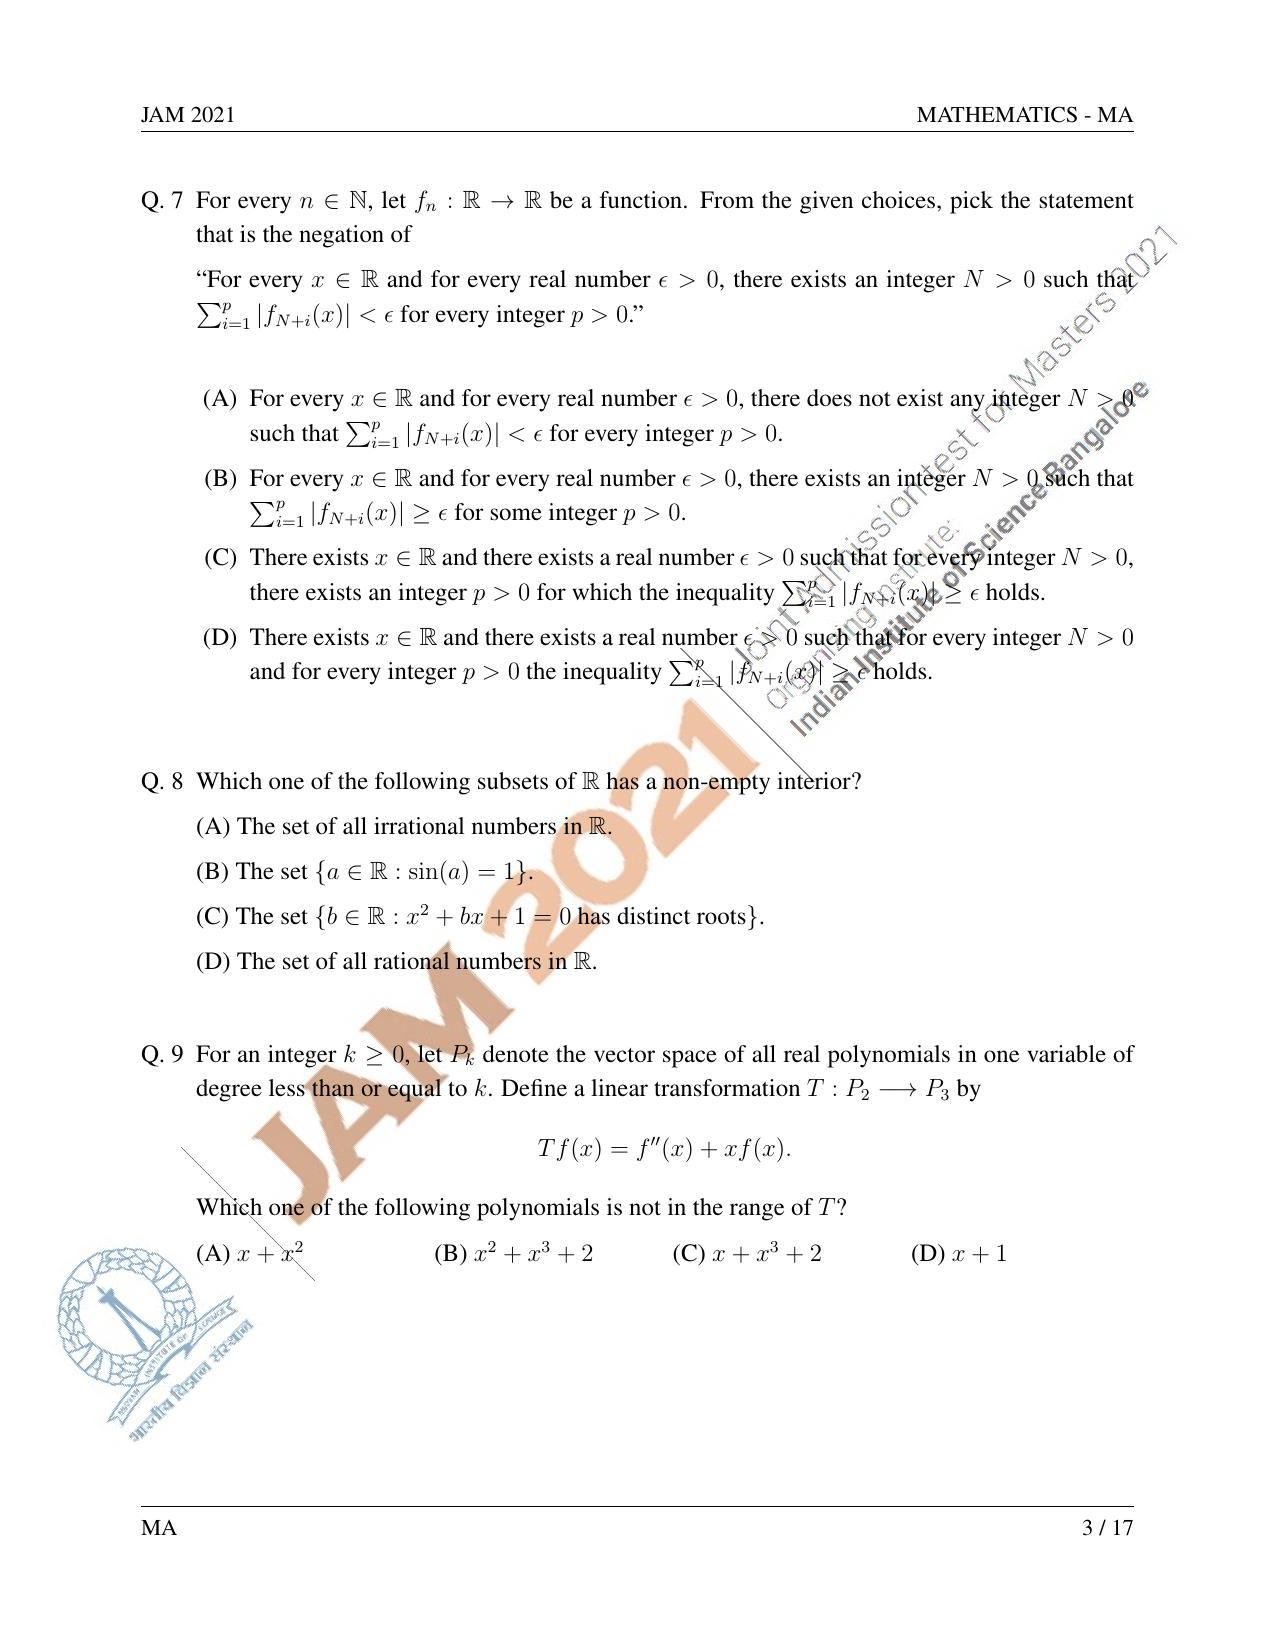 JAM 2021: MA Question Paper - Page 4